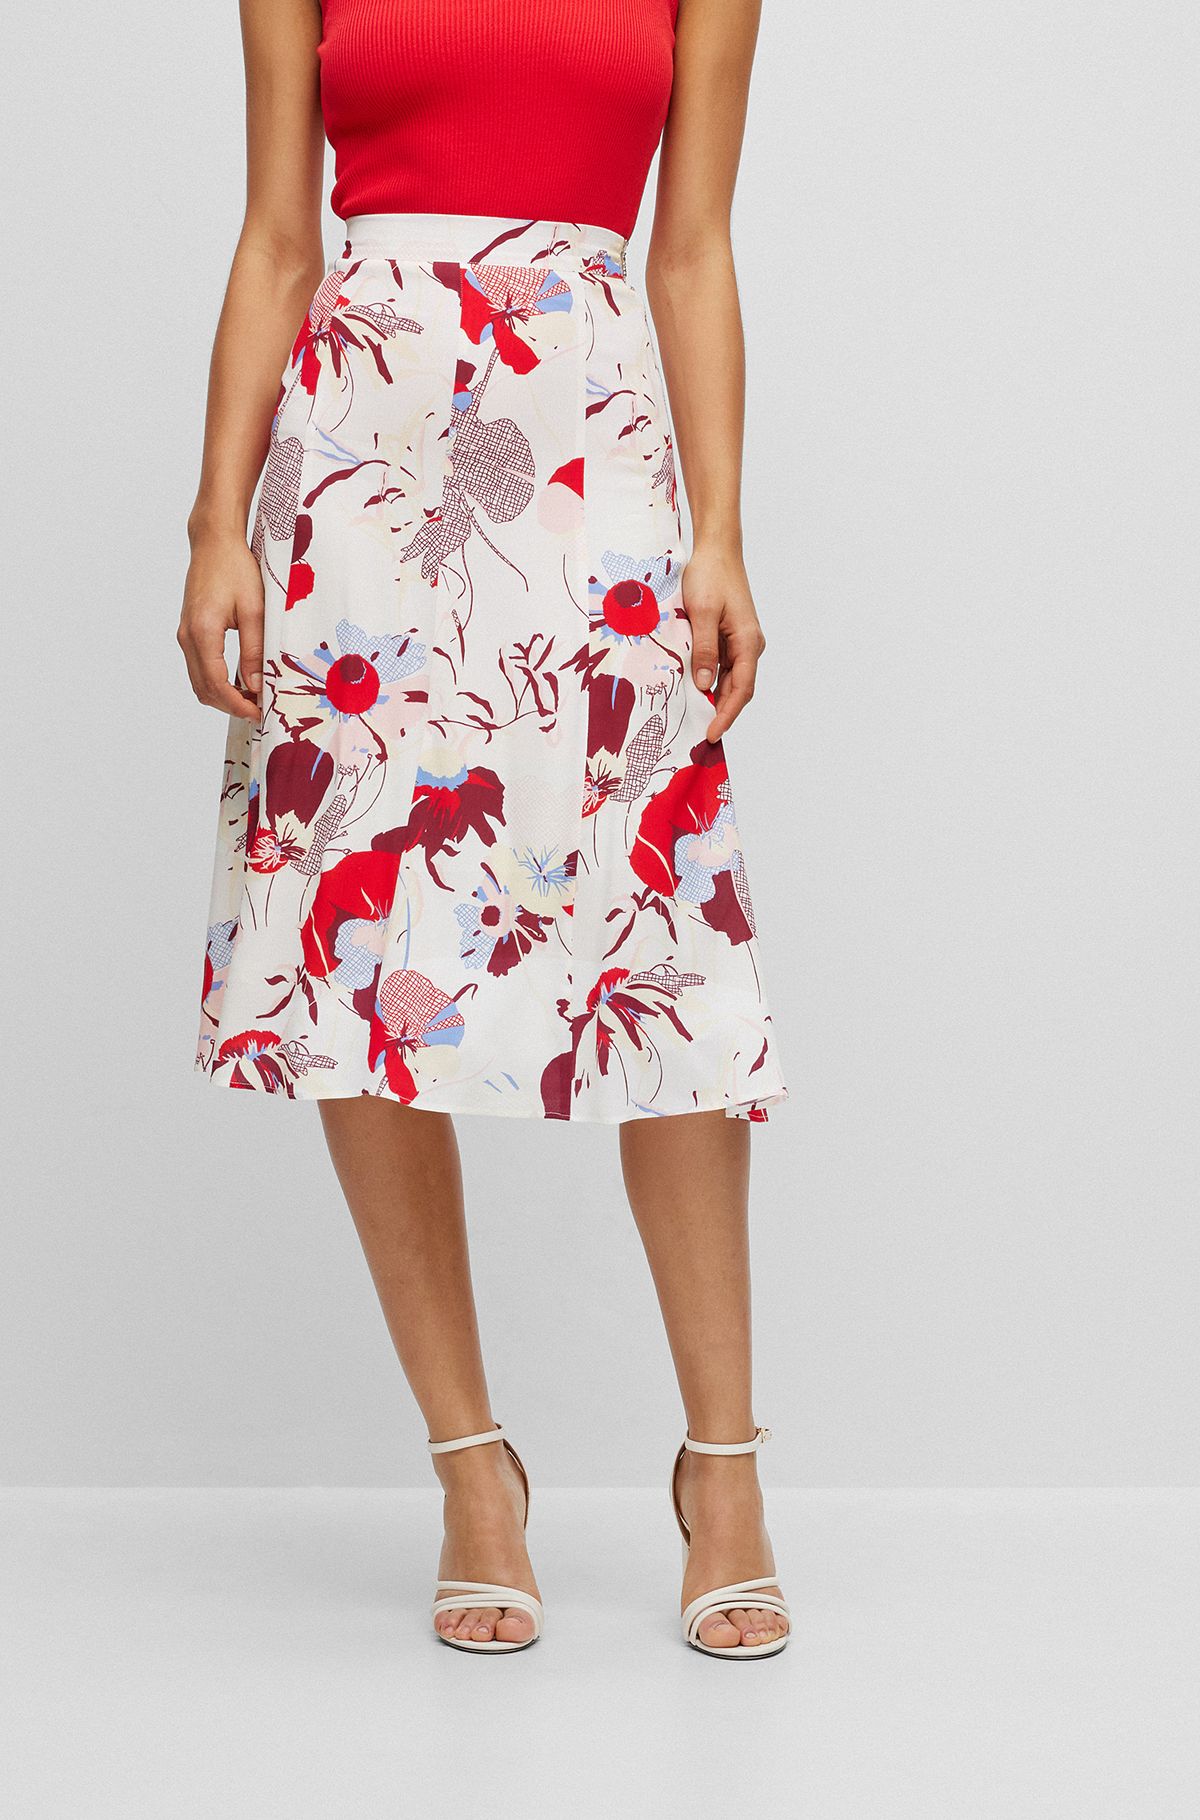 Knee-length skirt in floral-print fabric, Patterned